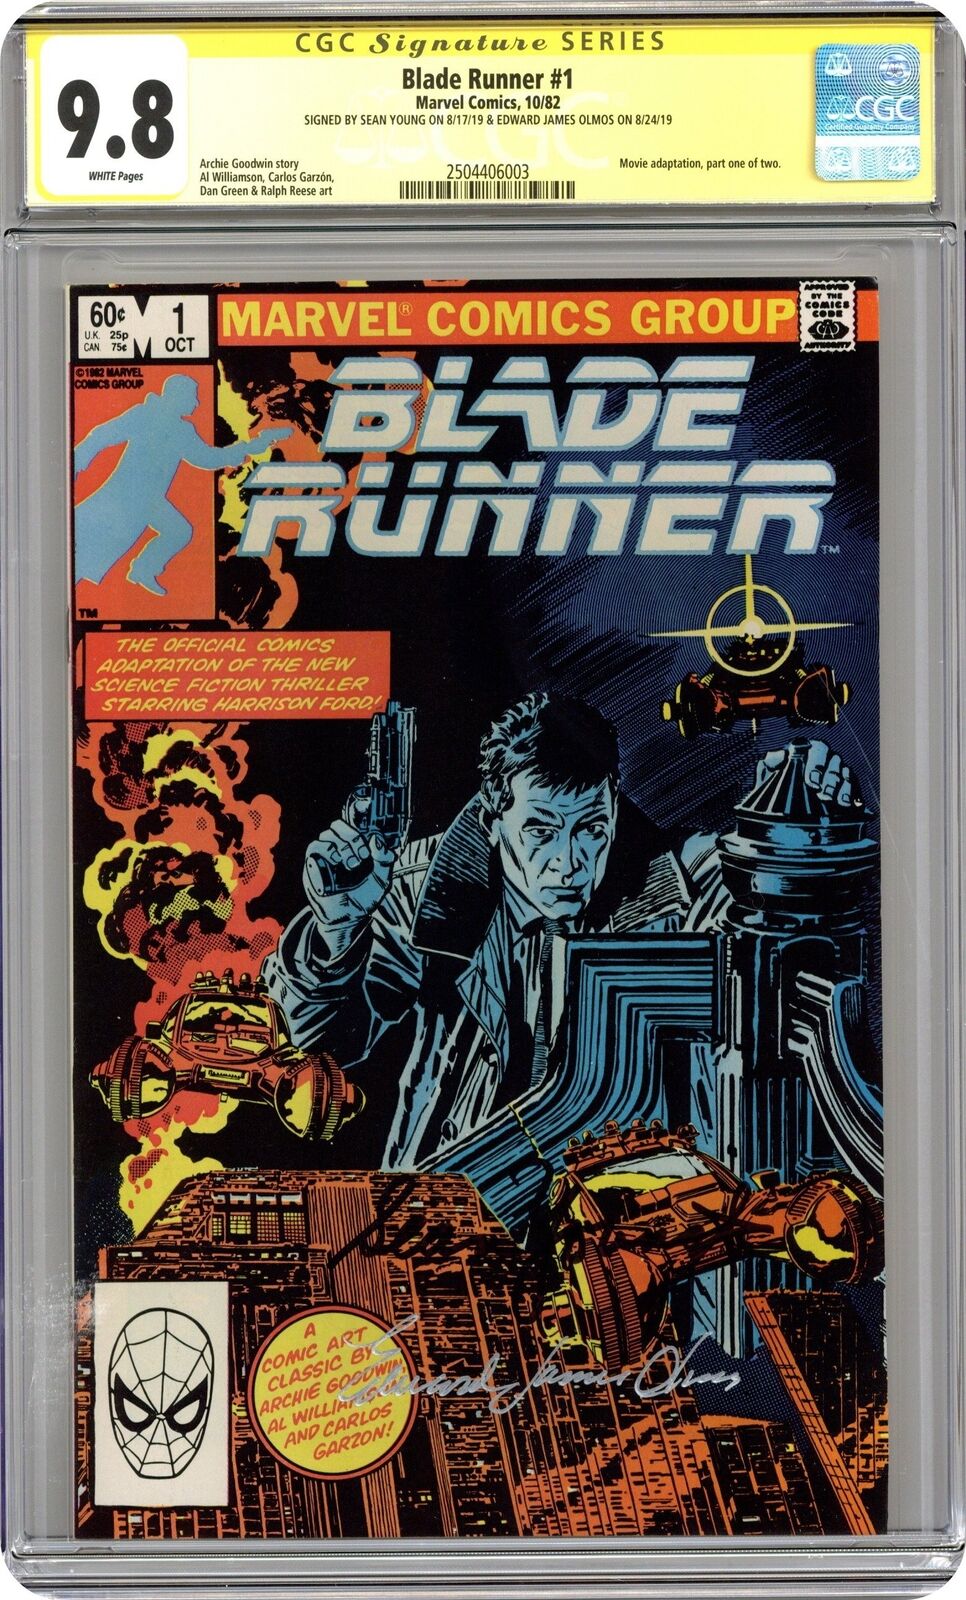 Blade Runner #1 CGC 9.8 SS Young/ Olmos 1982 2504406003